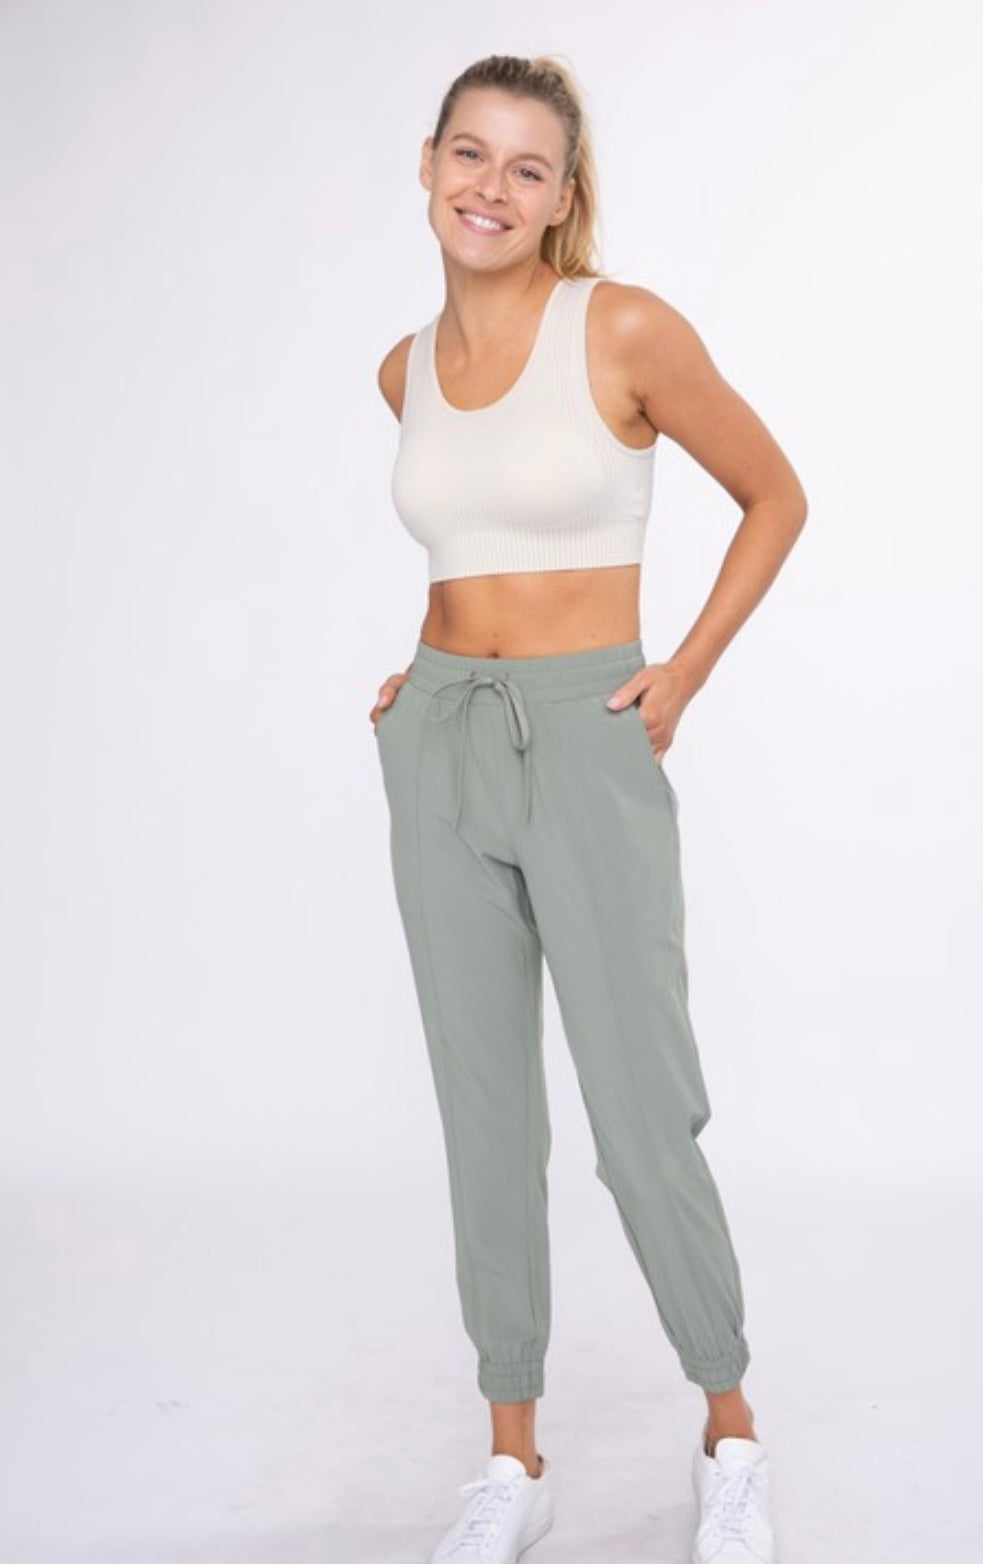 The Demi Athleisure Joggers